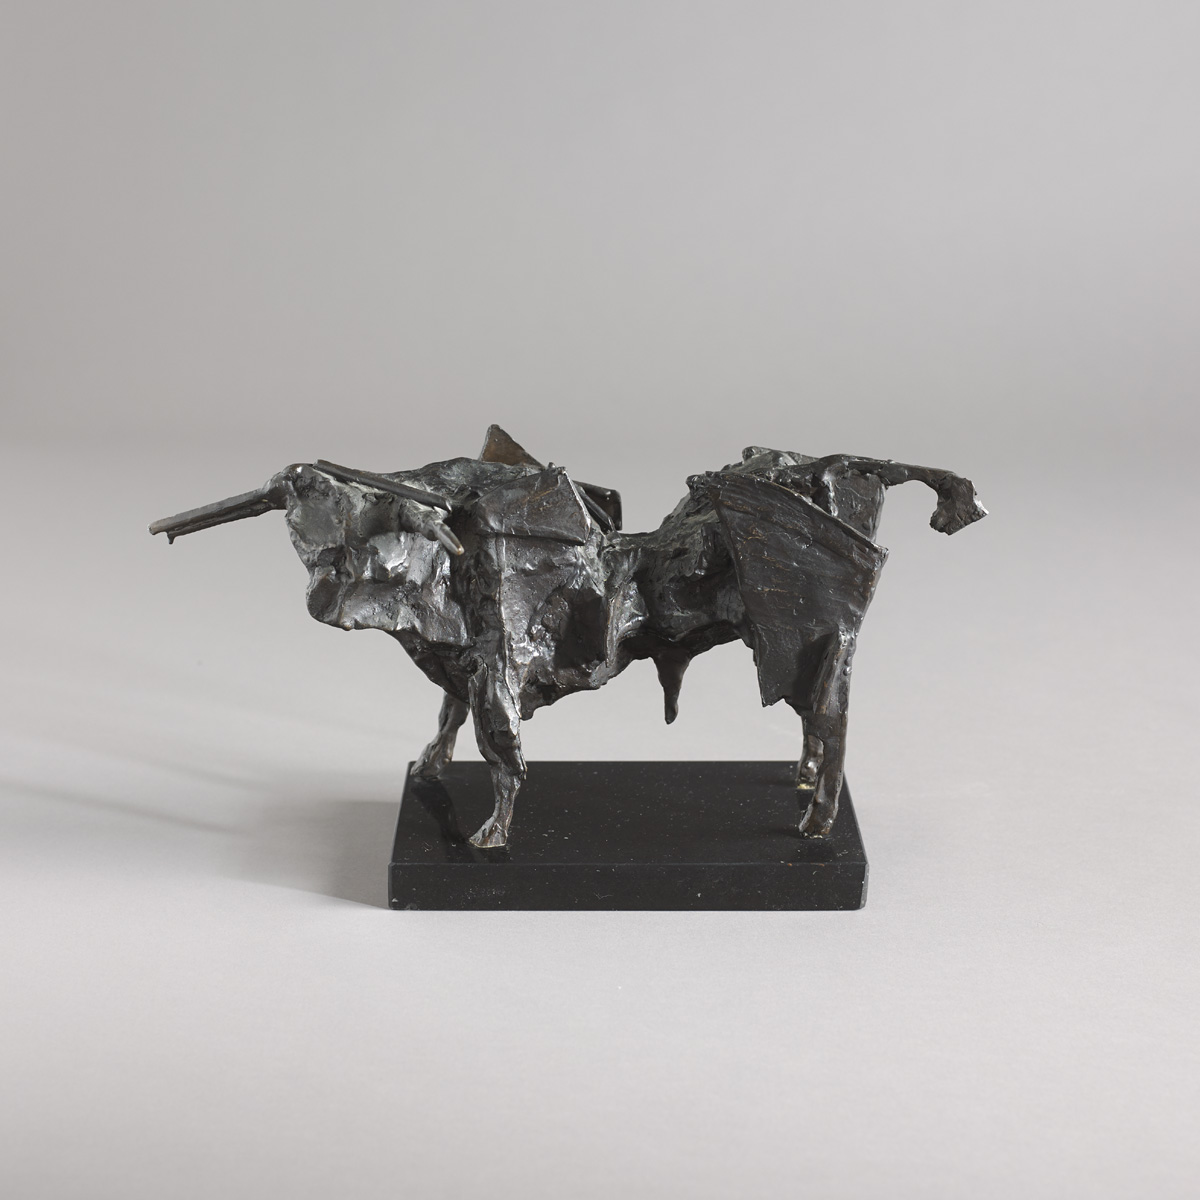 BULL, 1990 by John Behan sold for �3,600 at Whyte's Auctions